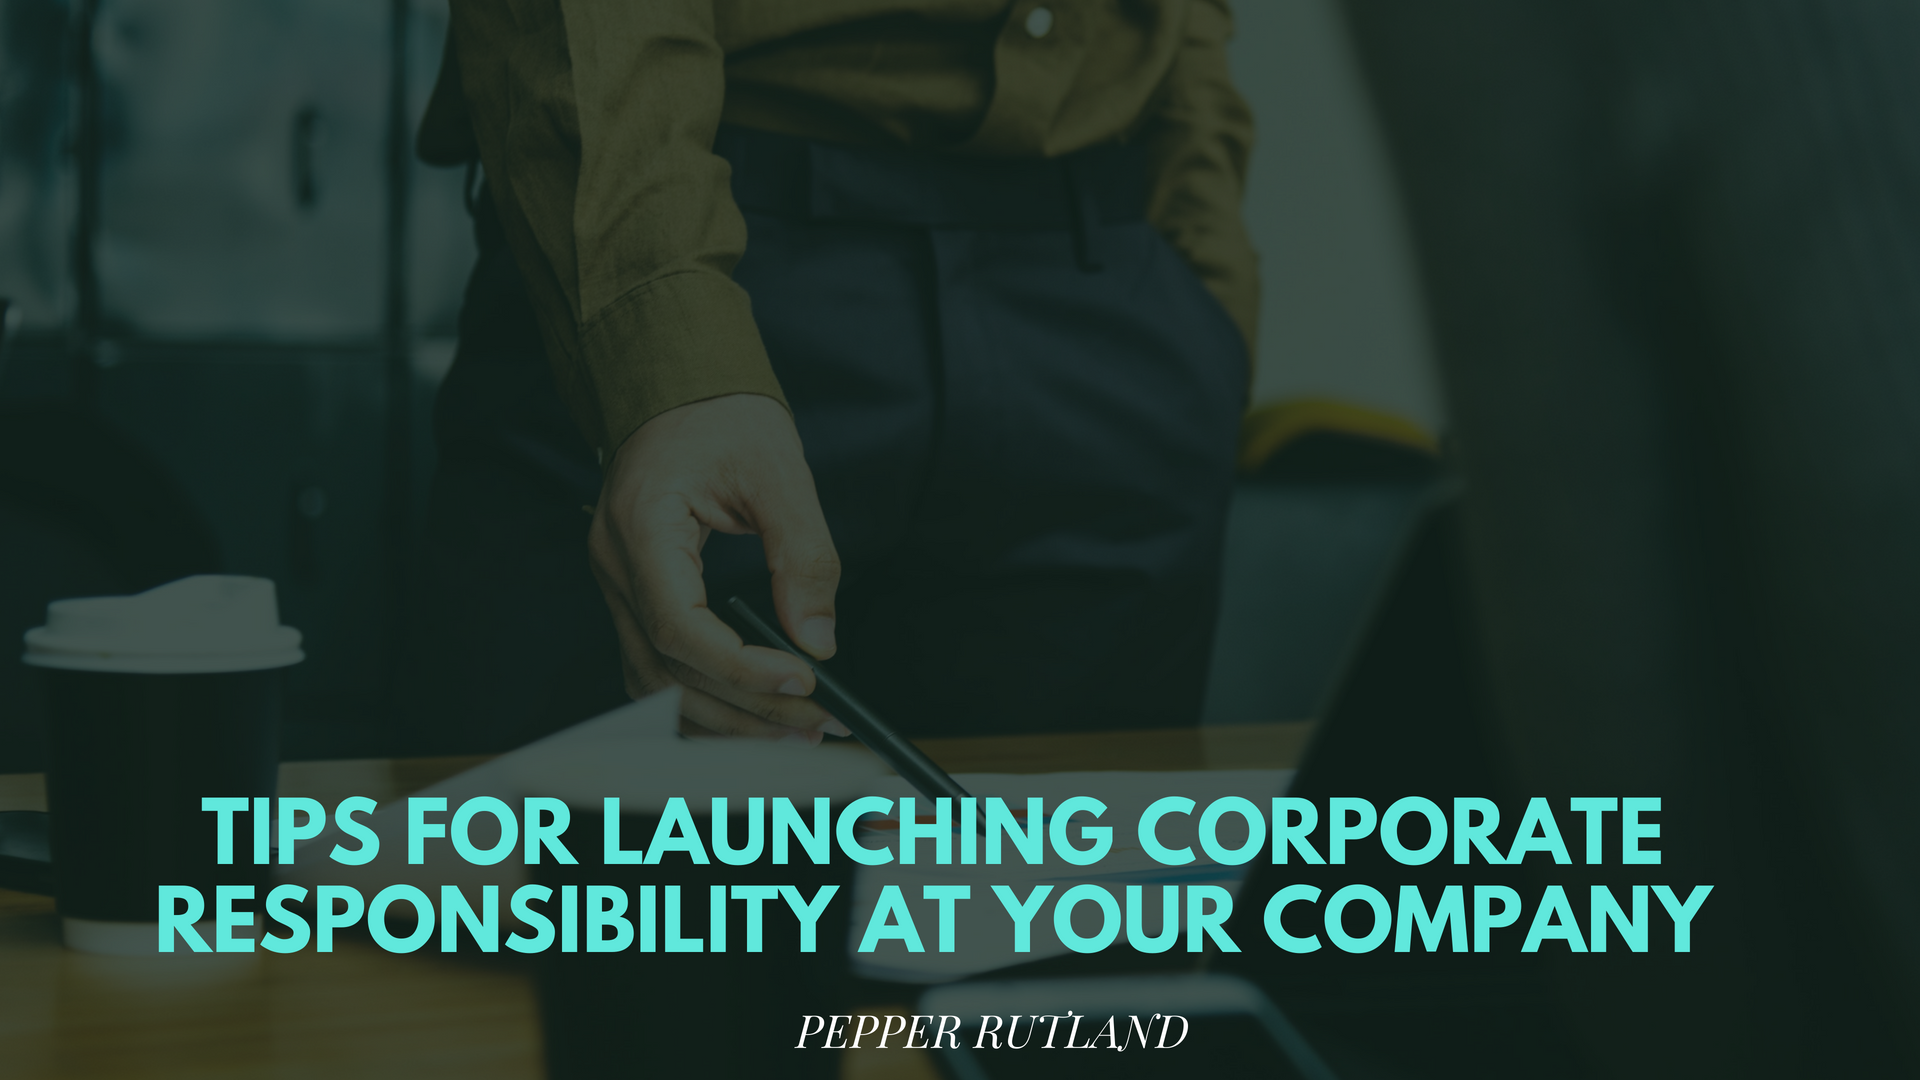 Tips for Launching Corporate Responsibility at your Company